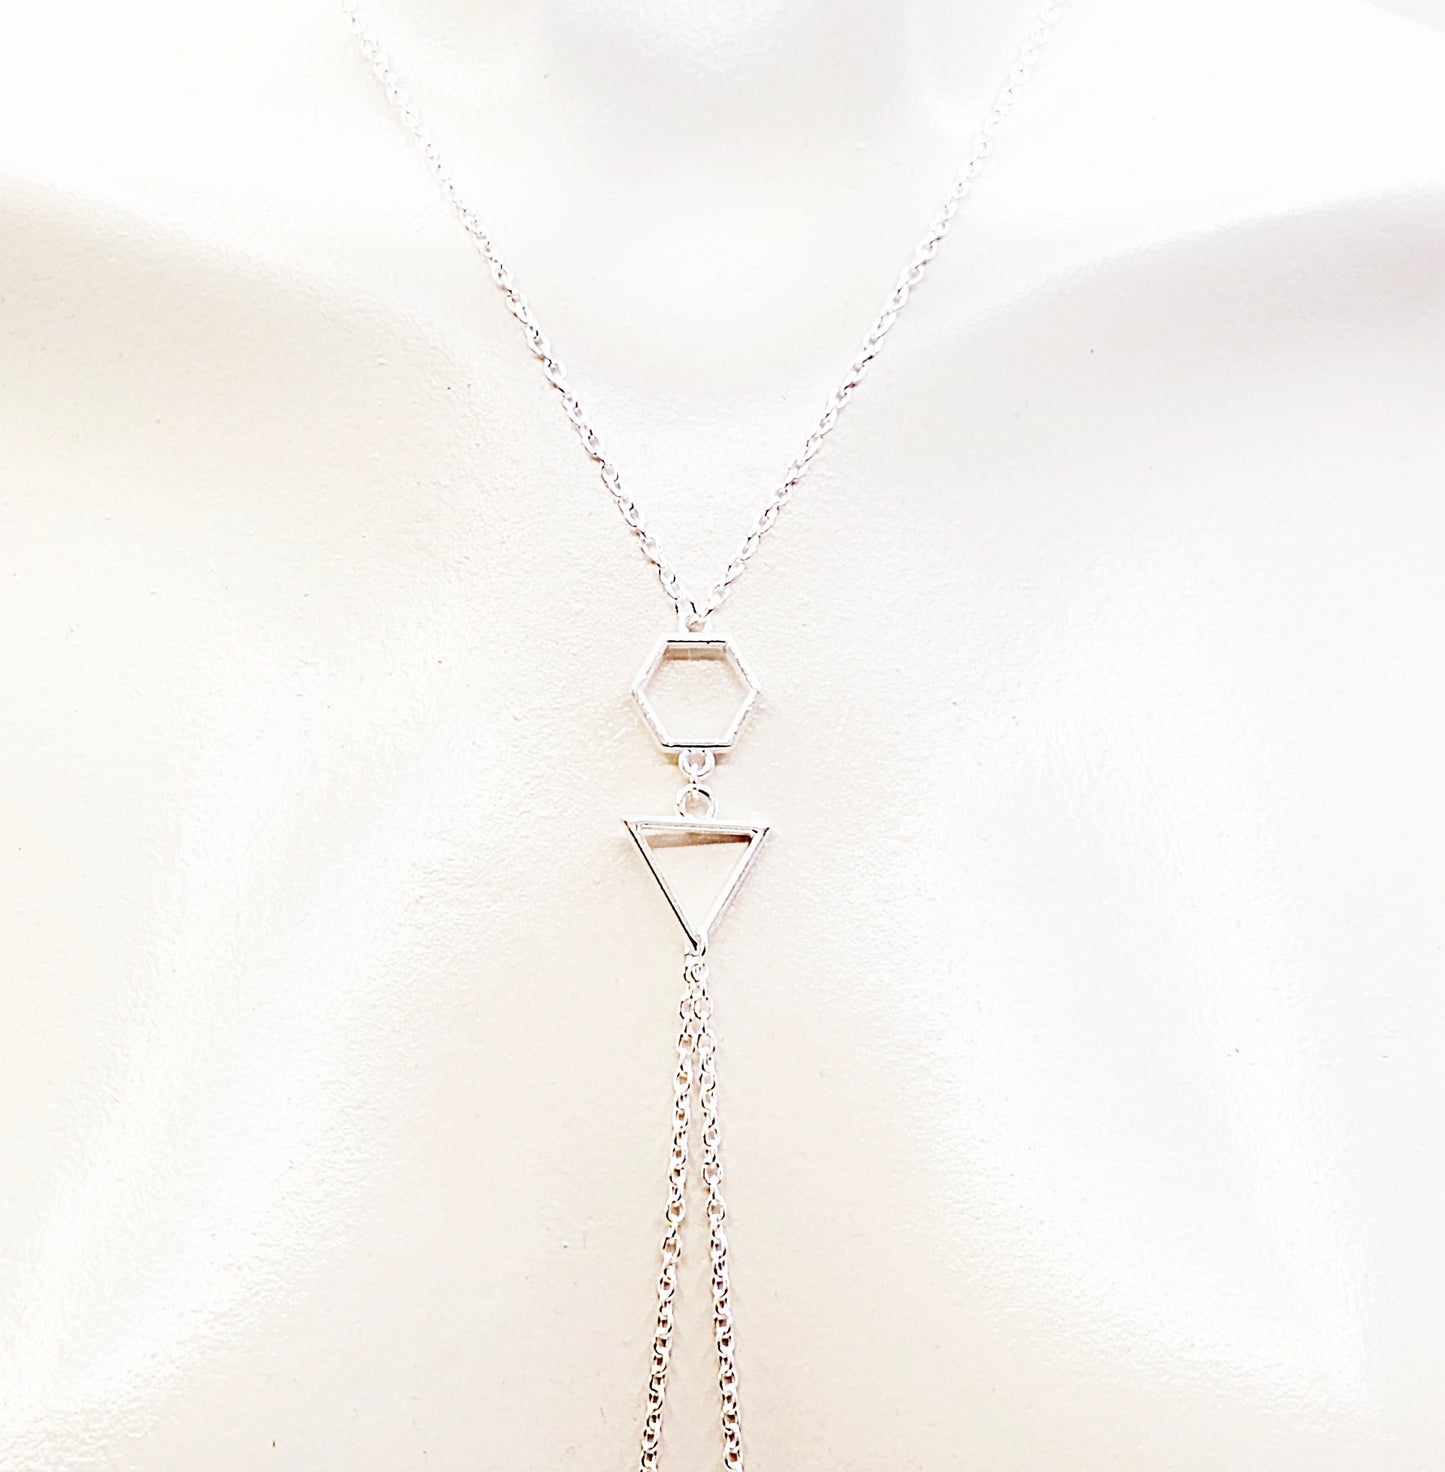 Sexy Geometric Necklace to Nipple Non-Piercing or Use with Pierced or Nipple Clamps